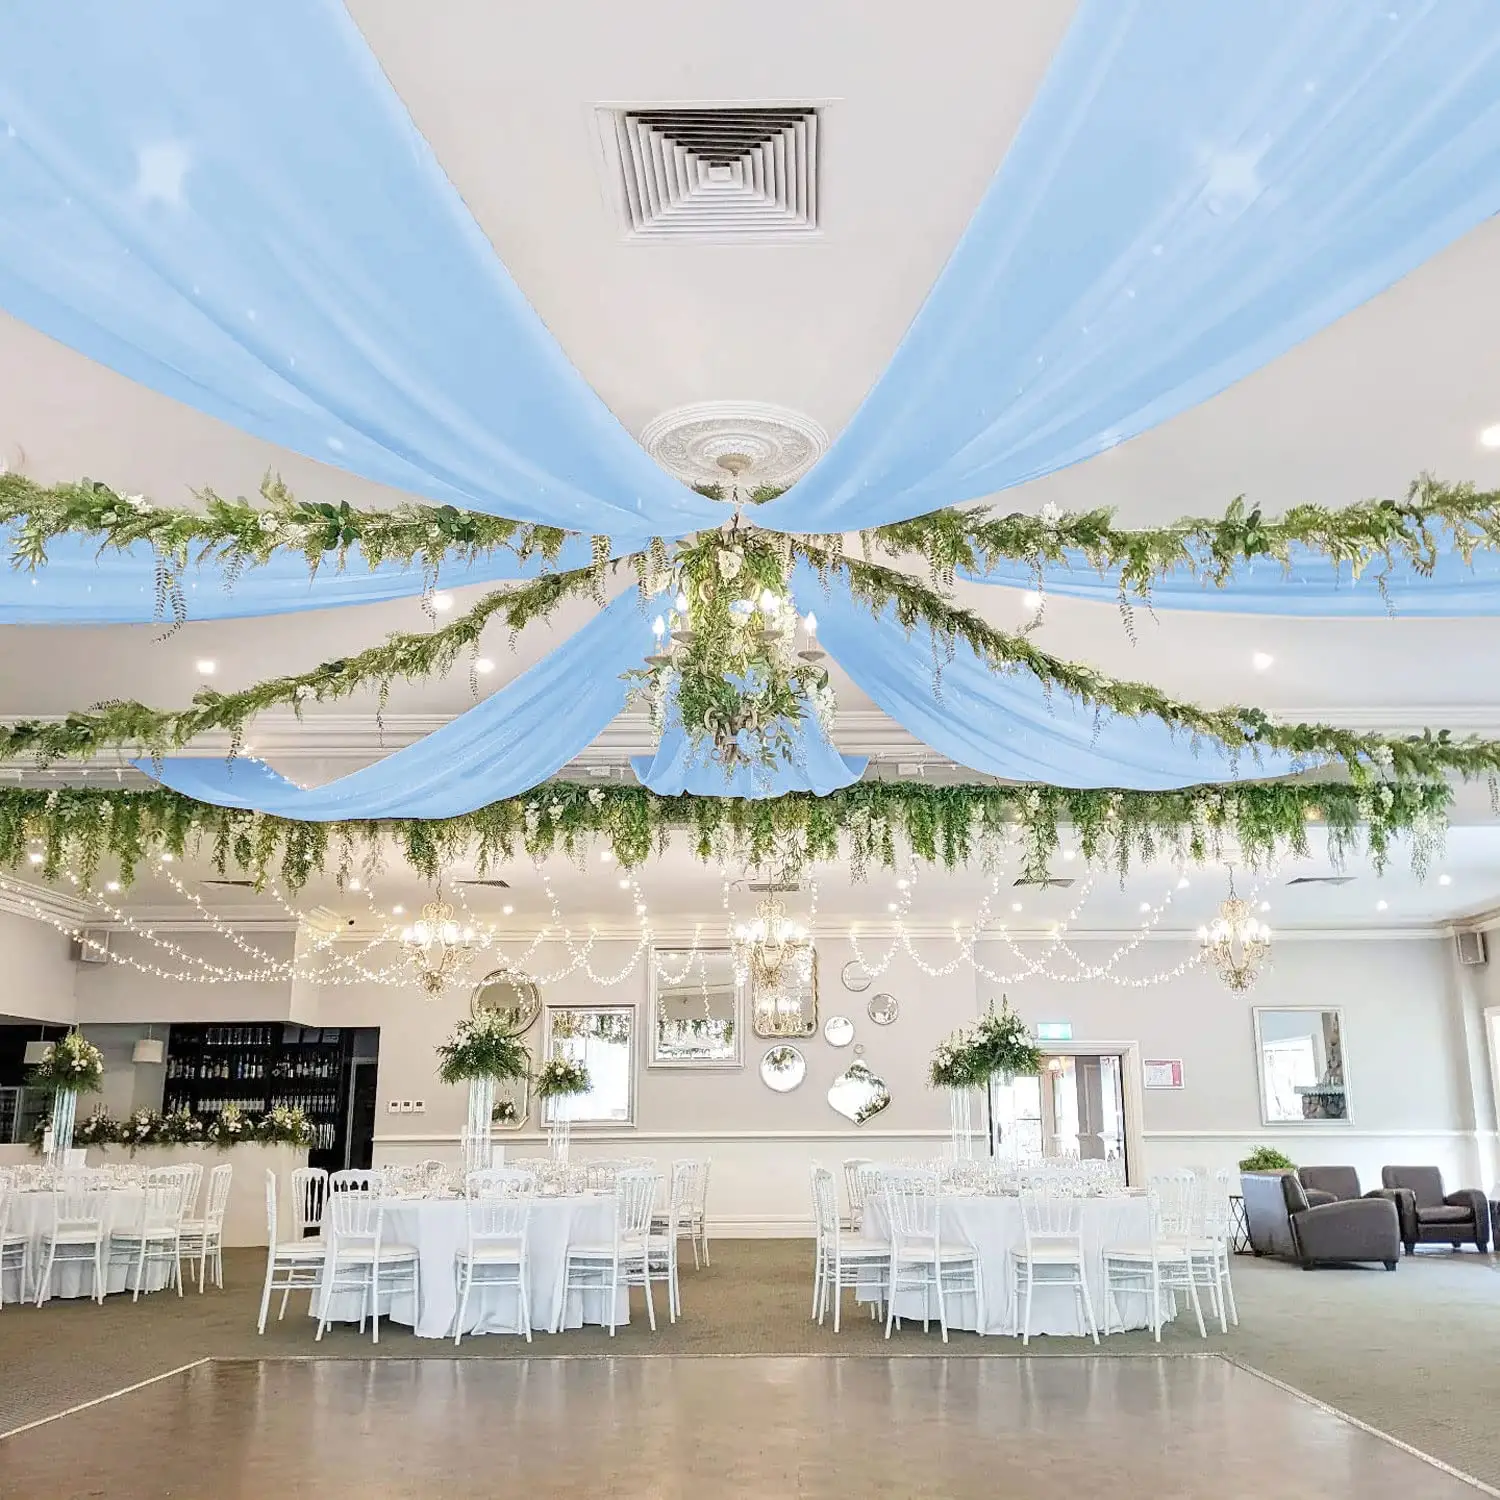 Ceiling Drapes for Parties Wedding Ceiling Chiffon Fabric for Wedding Arch Sheer Baby Blue Curtains Chiffon Drapes Tent Drapes